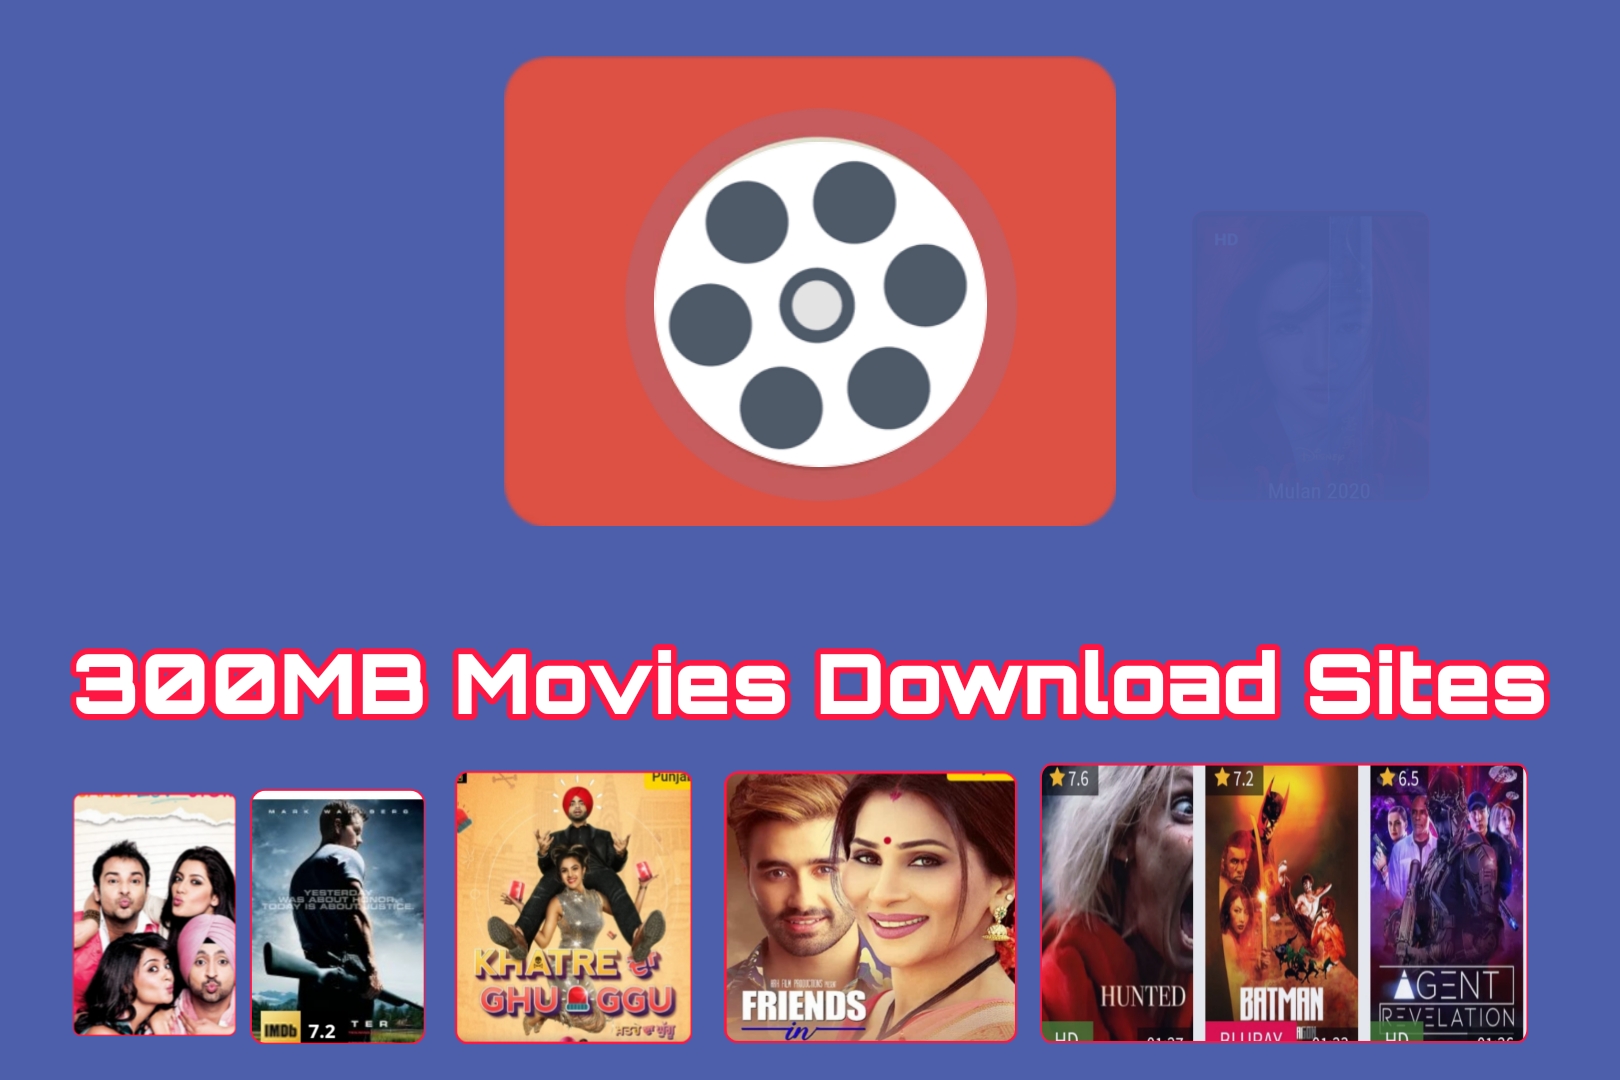 300MB Movies Download